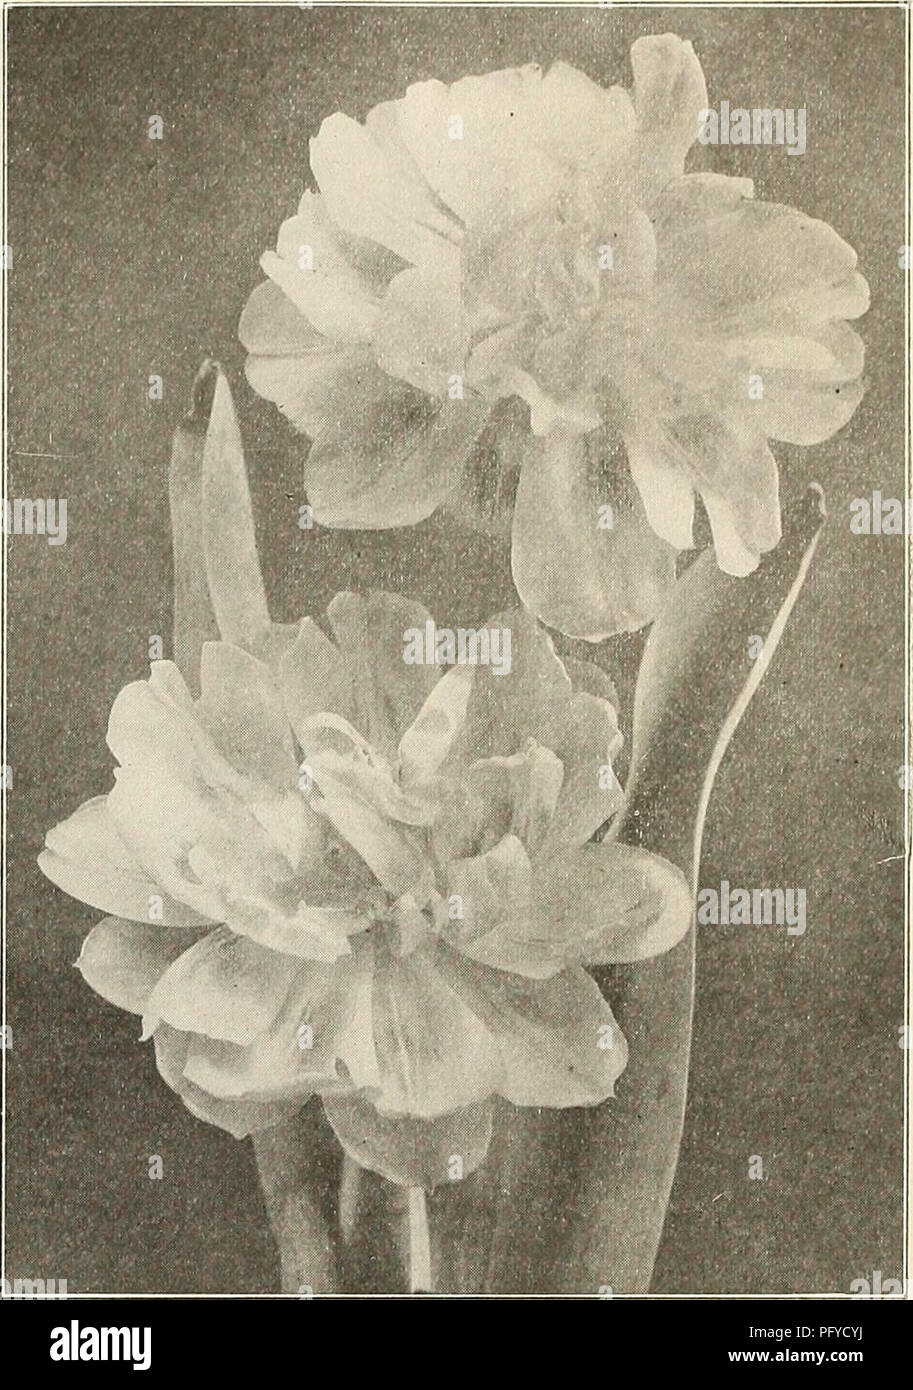 . Currie's bulbs and plants : autumn 1911. Flowers Seeds Catalogs; Bulbs (Plants) Seeds Catalogs; Nurseries (Horticulture) Catalogs; Plants, Ornamental Catalogs. CURRIE BROS. CO., AUTUMN CATALOGUE, 1911 c 9 b 10 b 6 c 9 c 9 b S c 8 b S c 6 c 6 e 9 e 9 b 9 c 8 c 8 b 7 d 8 e 9 Double Early Flowering Tulips Each Doz. 100 1000 Blanche HatlveâLarge, early semi-double, white 4 40 $2.75 $20.00 Couronne de RosesâFinest rose 0 60 4.50 40.00 Couroune il'OrâOrange 4 40 2.75 20.00 .Due van ThollâRed and yellow 3 25 1.75 10.00 Duke of YorkâRed and white. 3 30 2.00 15.00 Glorin SolusâBrown and yel- low 3 30 Stock Photo